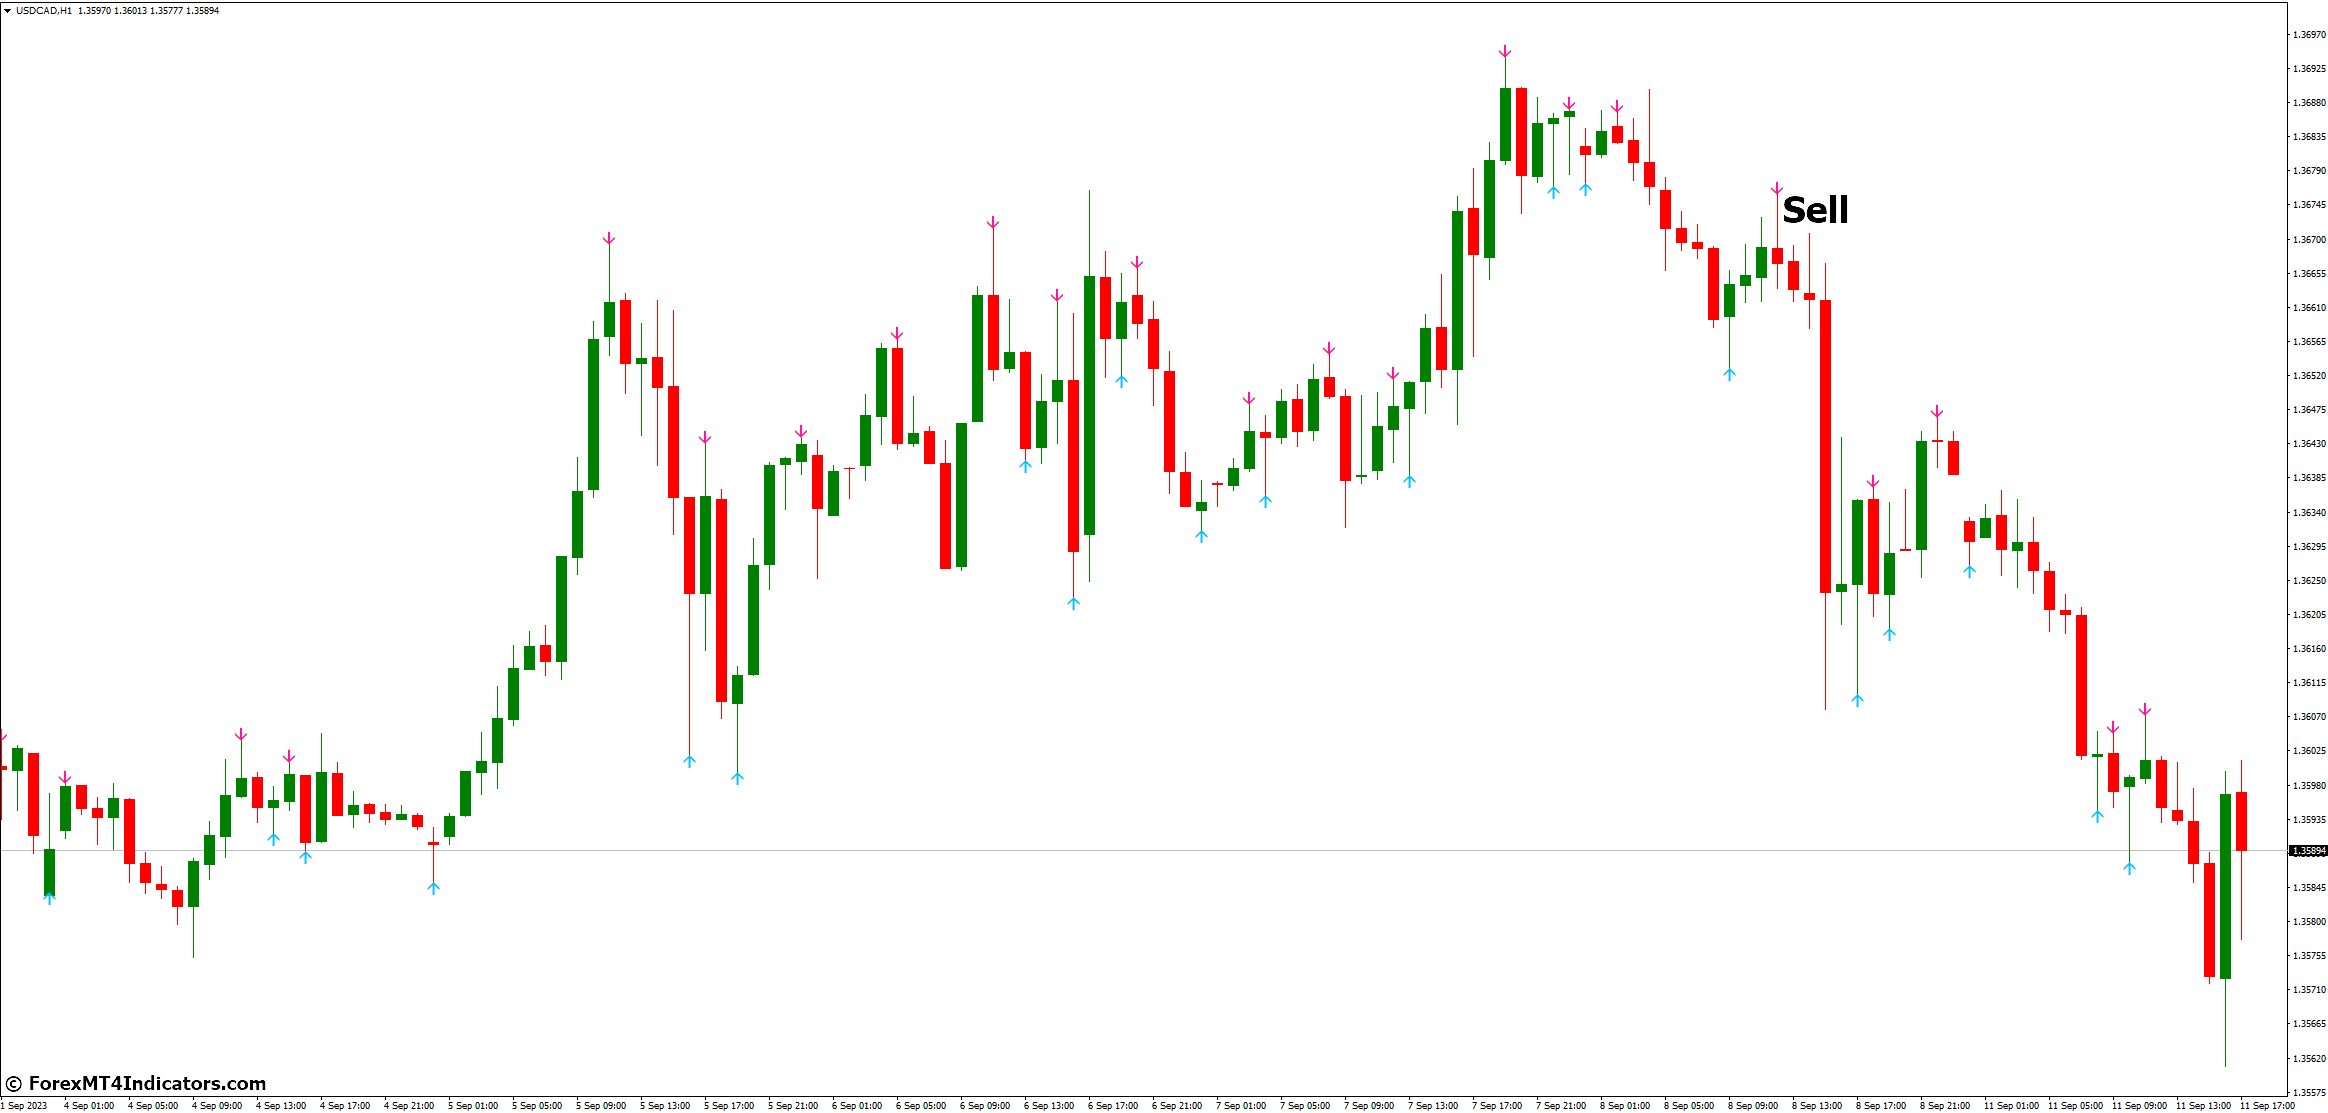 How to Trade with No Repaint MT4 Indicator - Sell Entry